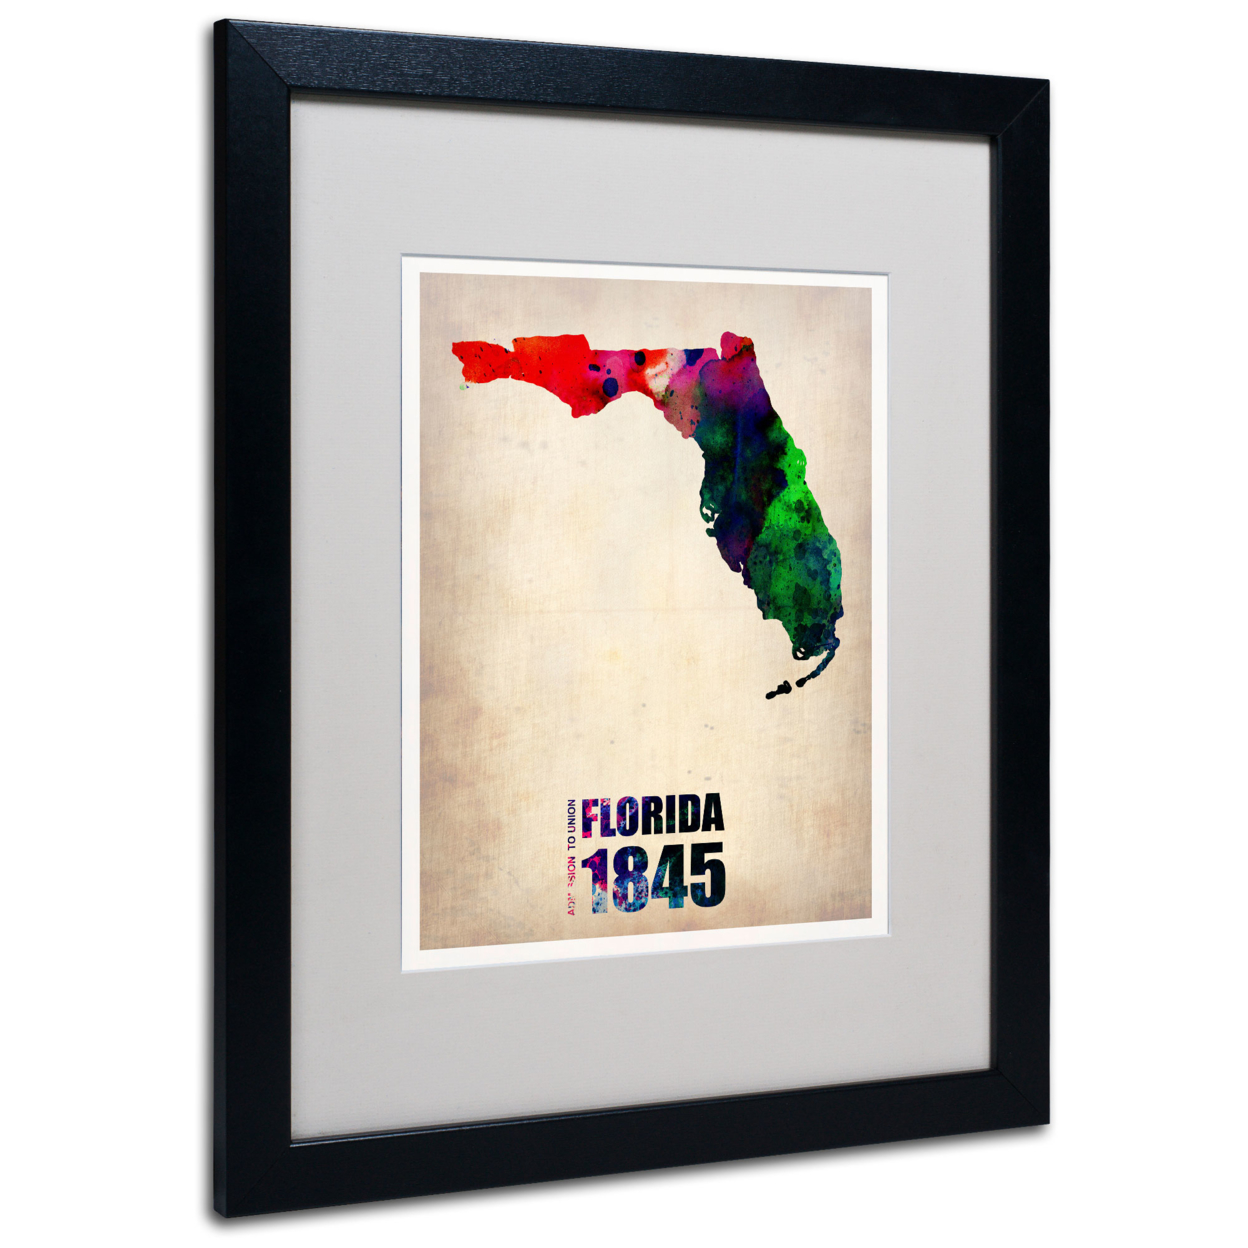 Naxart 'Florida Watercolor Map' Black Wooden Framed Art 18 X 22 Inches